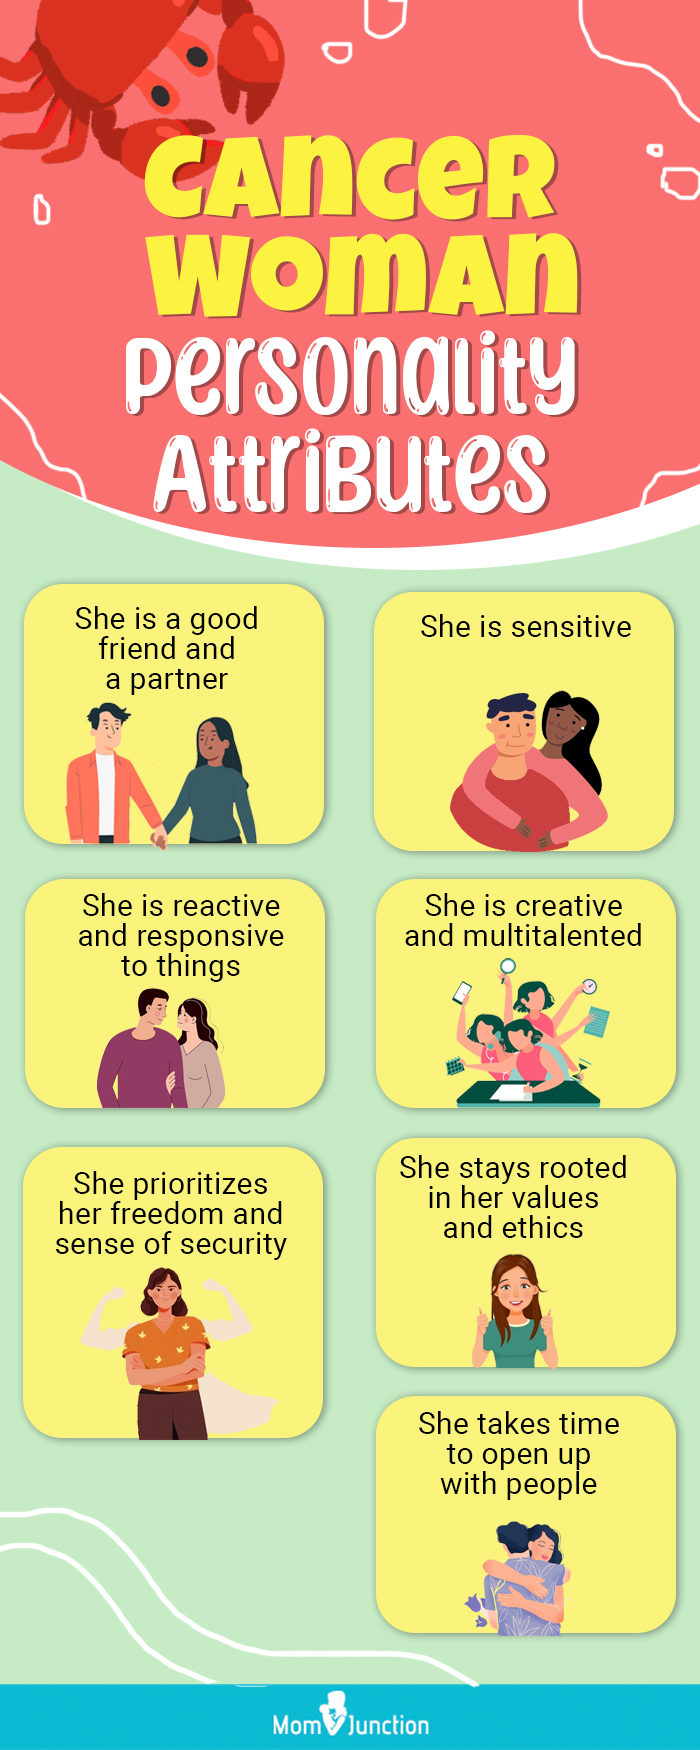 Cancer Woman Personality Attributes 